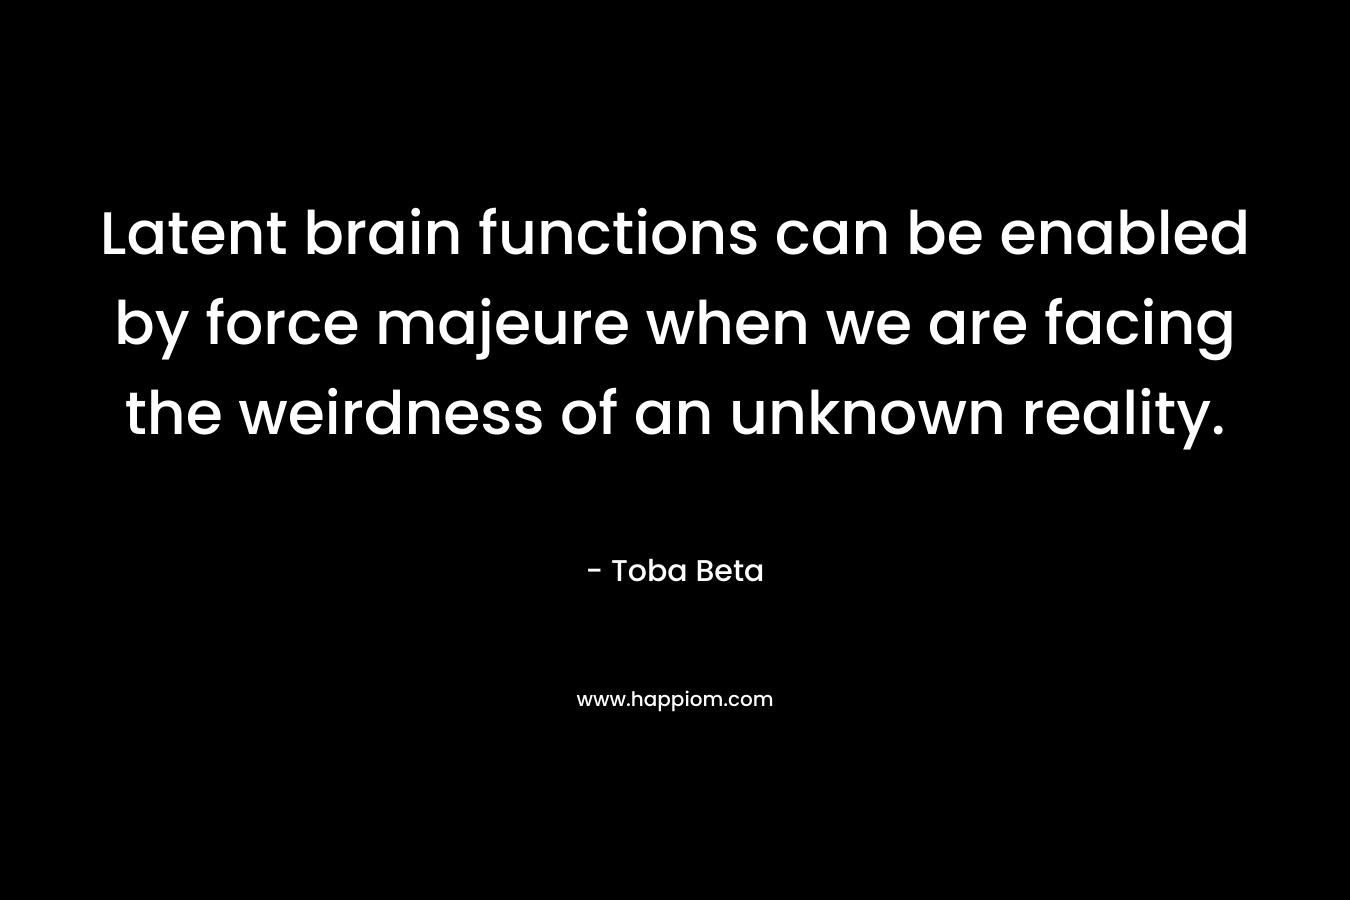 Latent brain functions can be enabled by force majeure when we are facing the weirdness of an unknown reality.